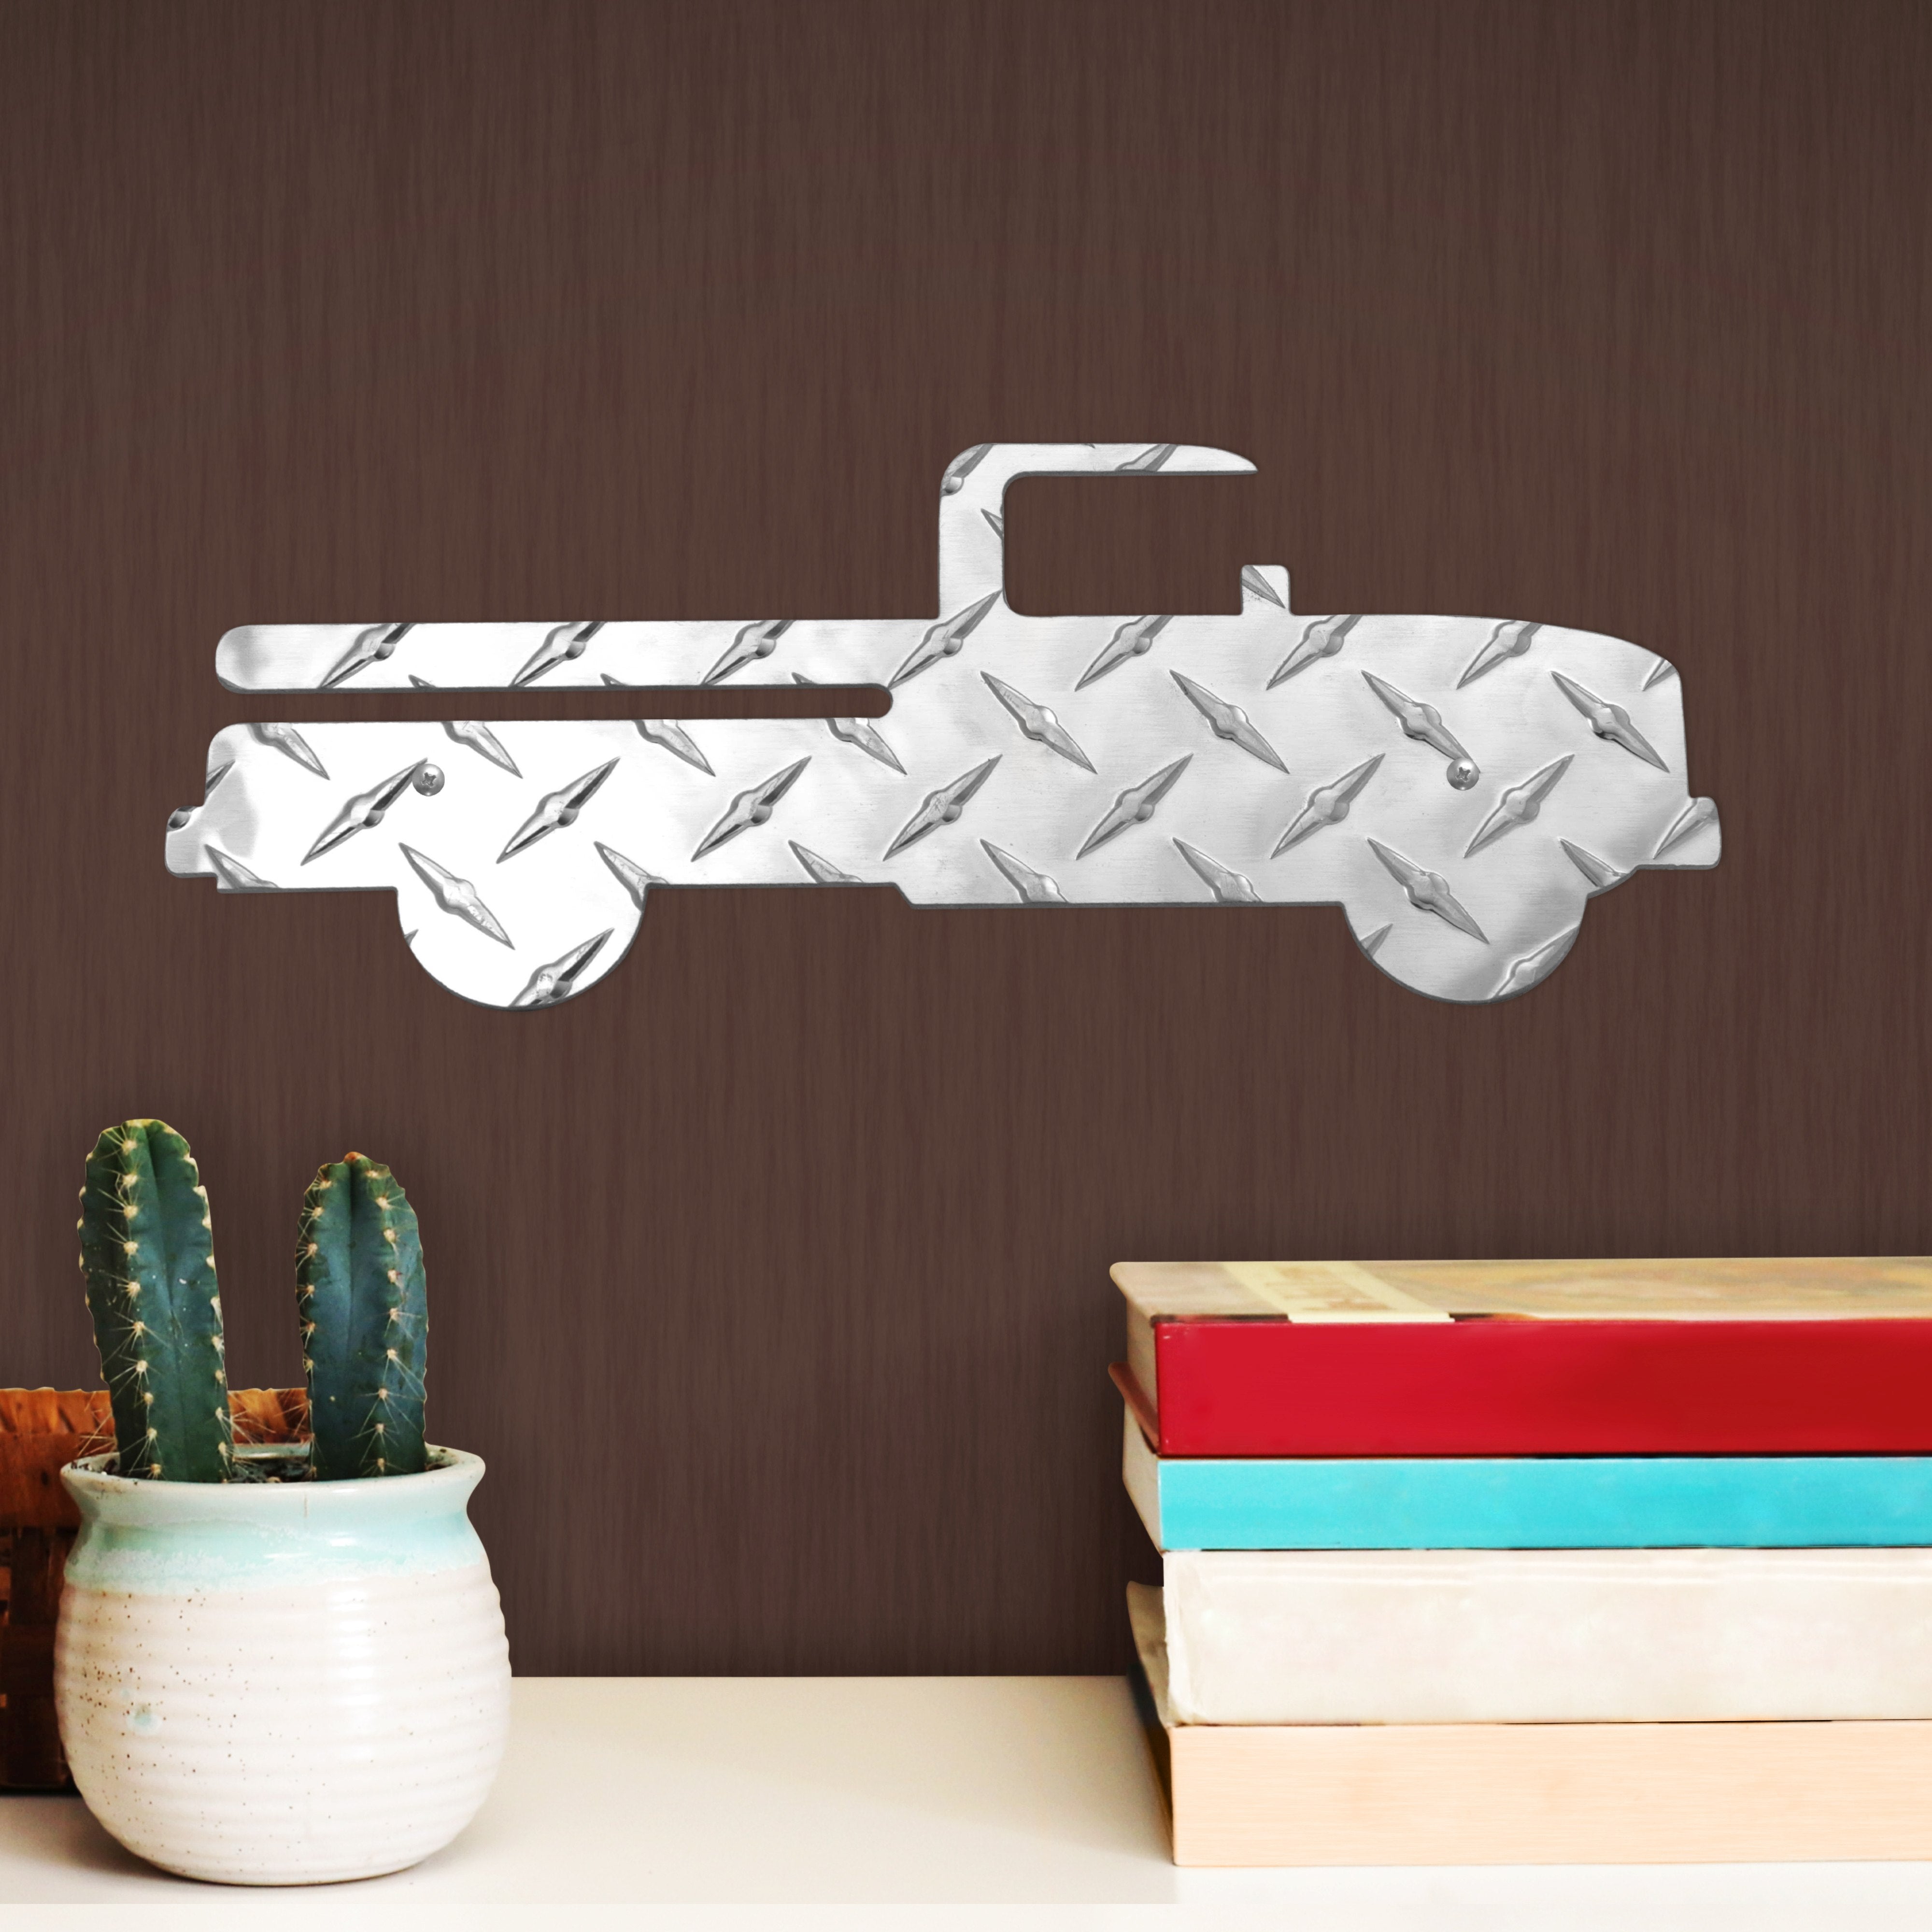 Pickup Truck Hanging Metal Wall Decor Durable Polished Aluminum Diamond Tread Pattern Indoor Outdoor with Mounting Hardware 12 Inches Long